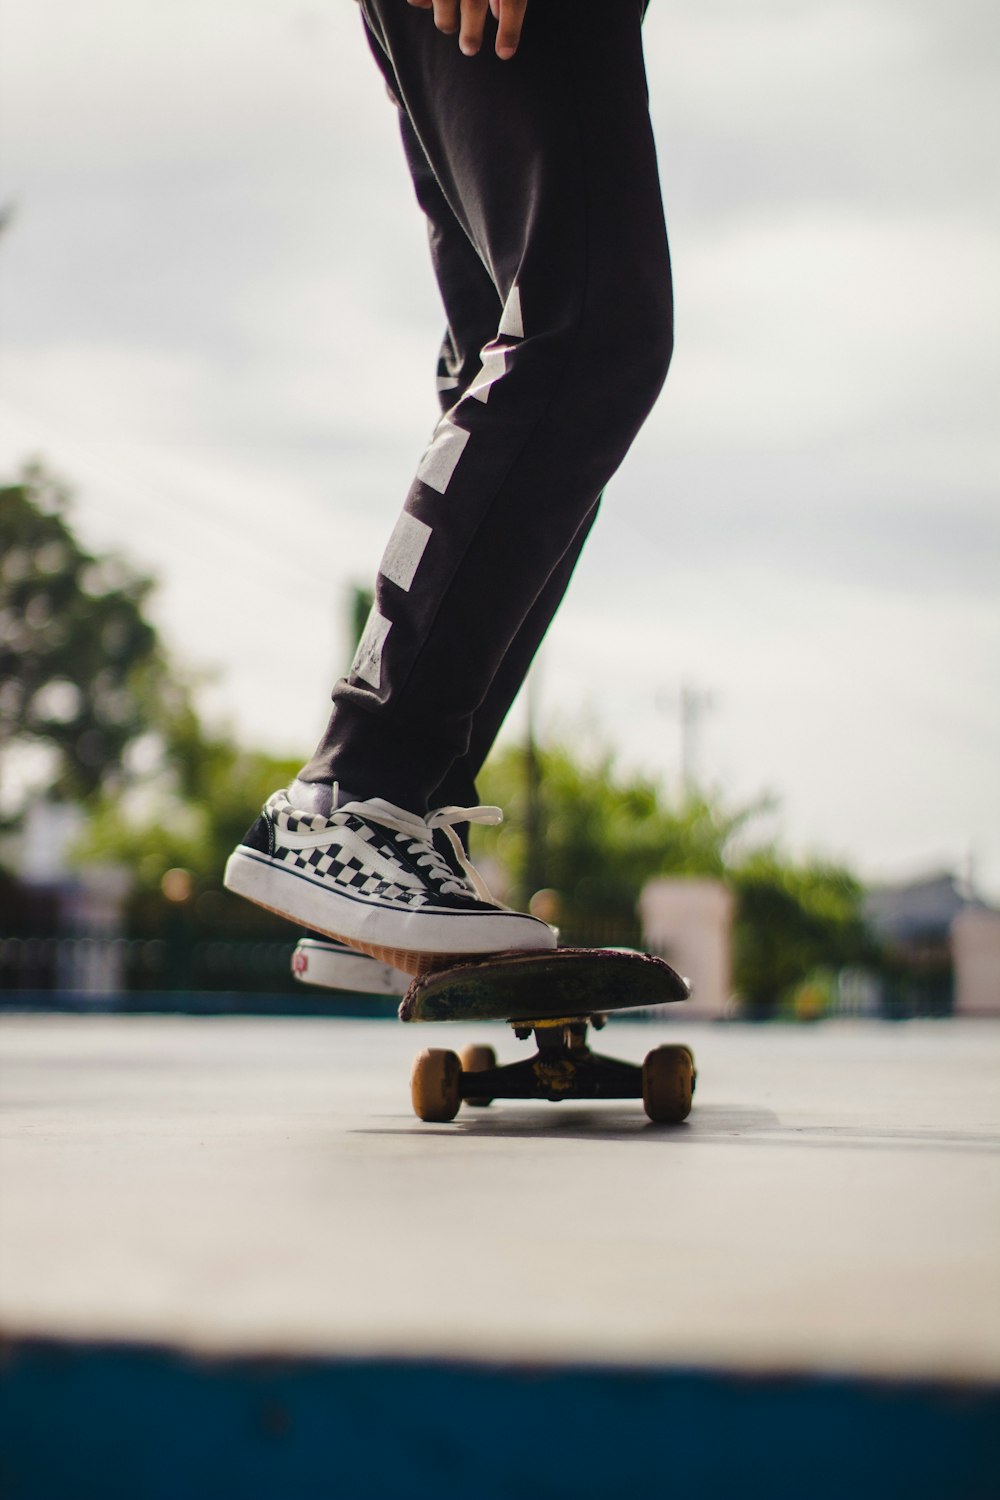 draadloos Regenjas Roman person in black and white adidas sneakers riding skateboard during daytime  photo – Free Skateboard Image on Unsplash